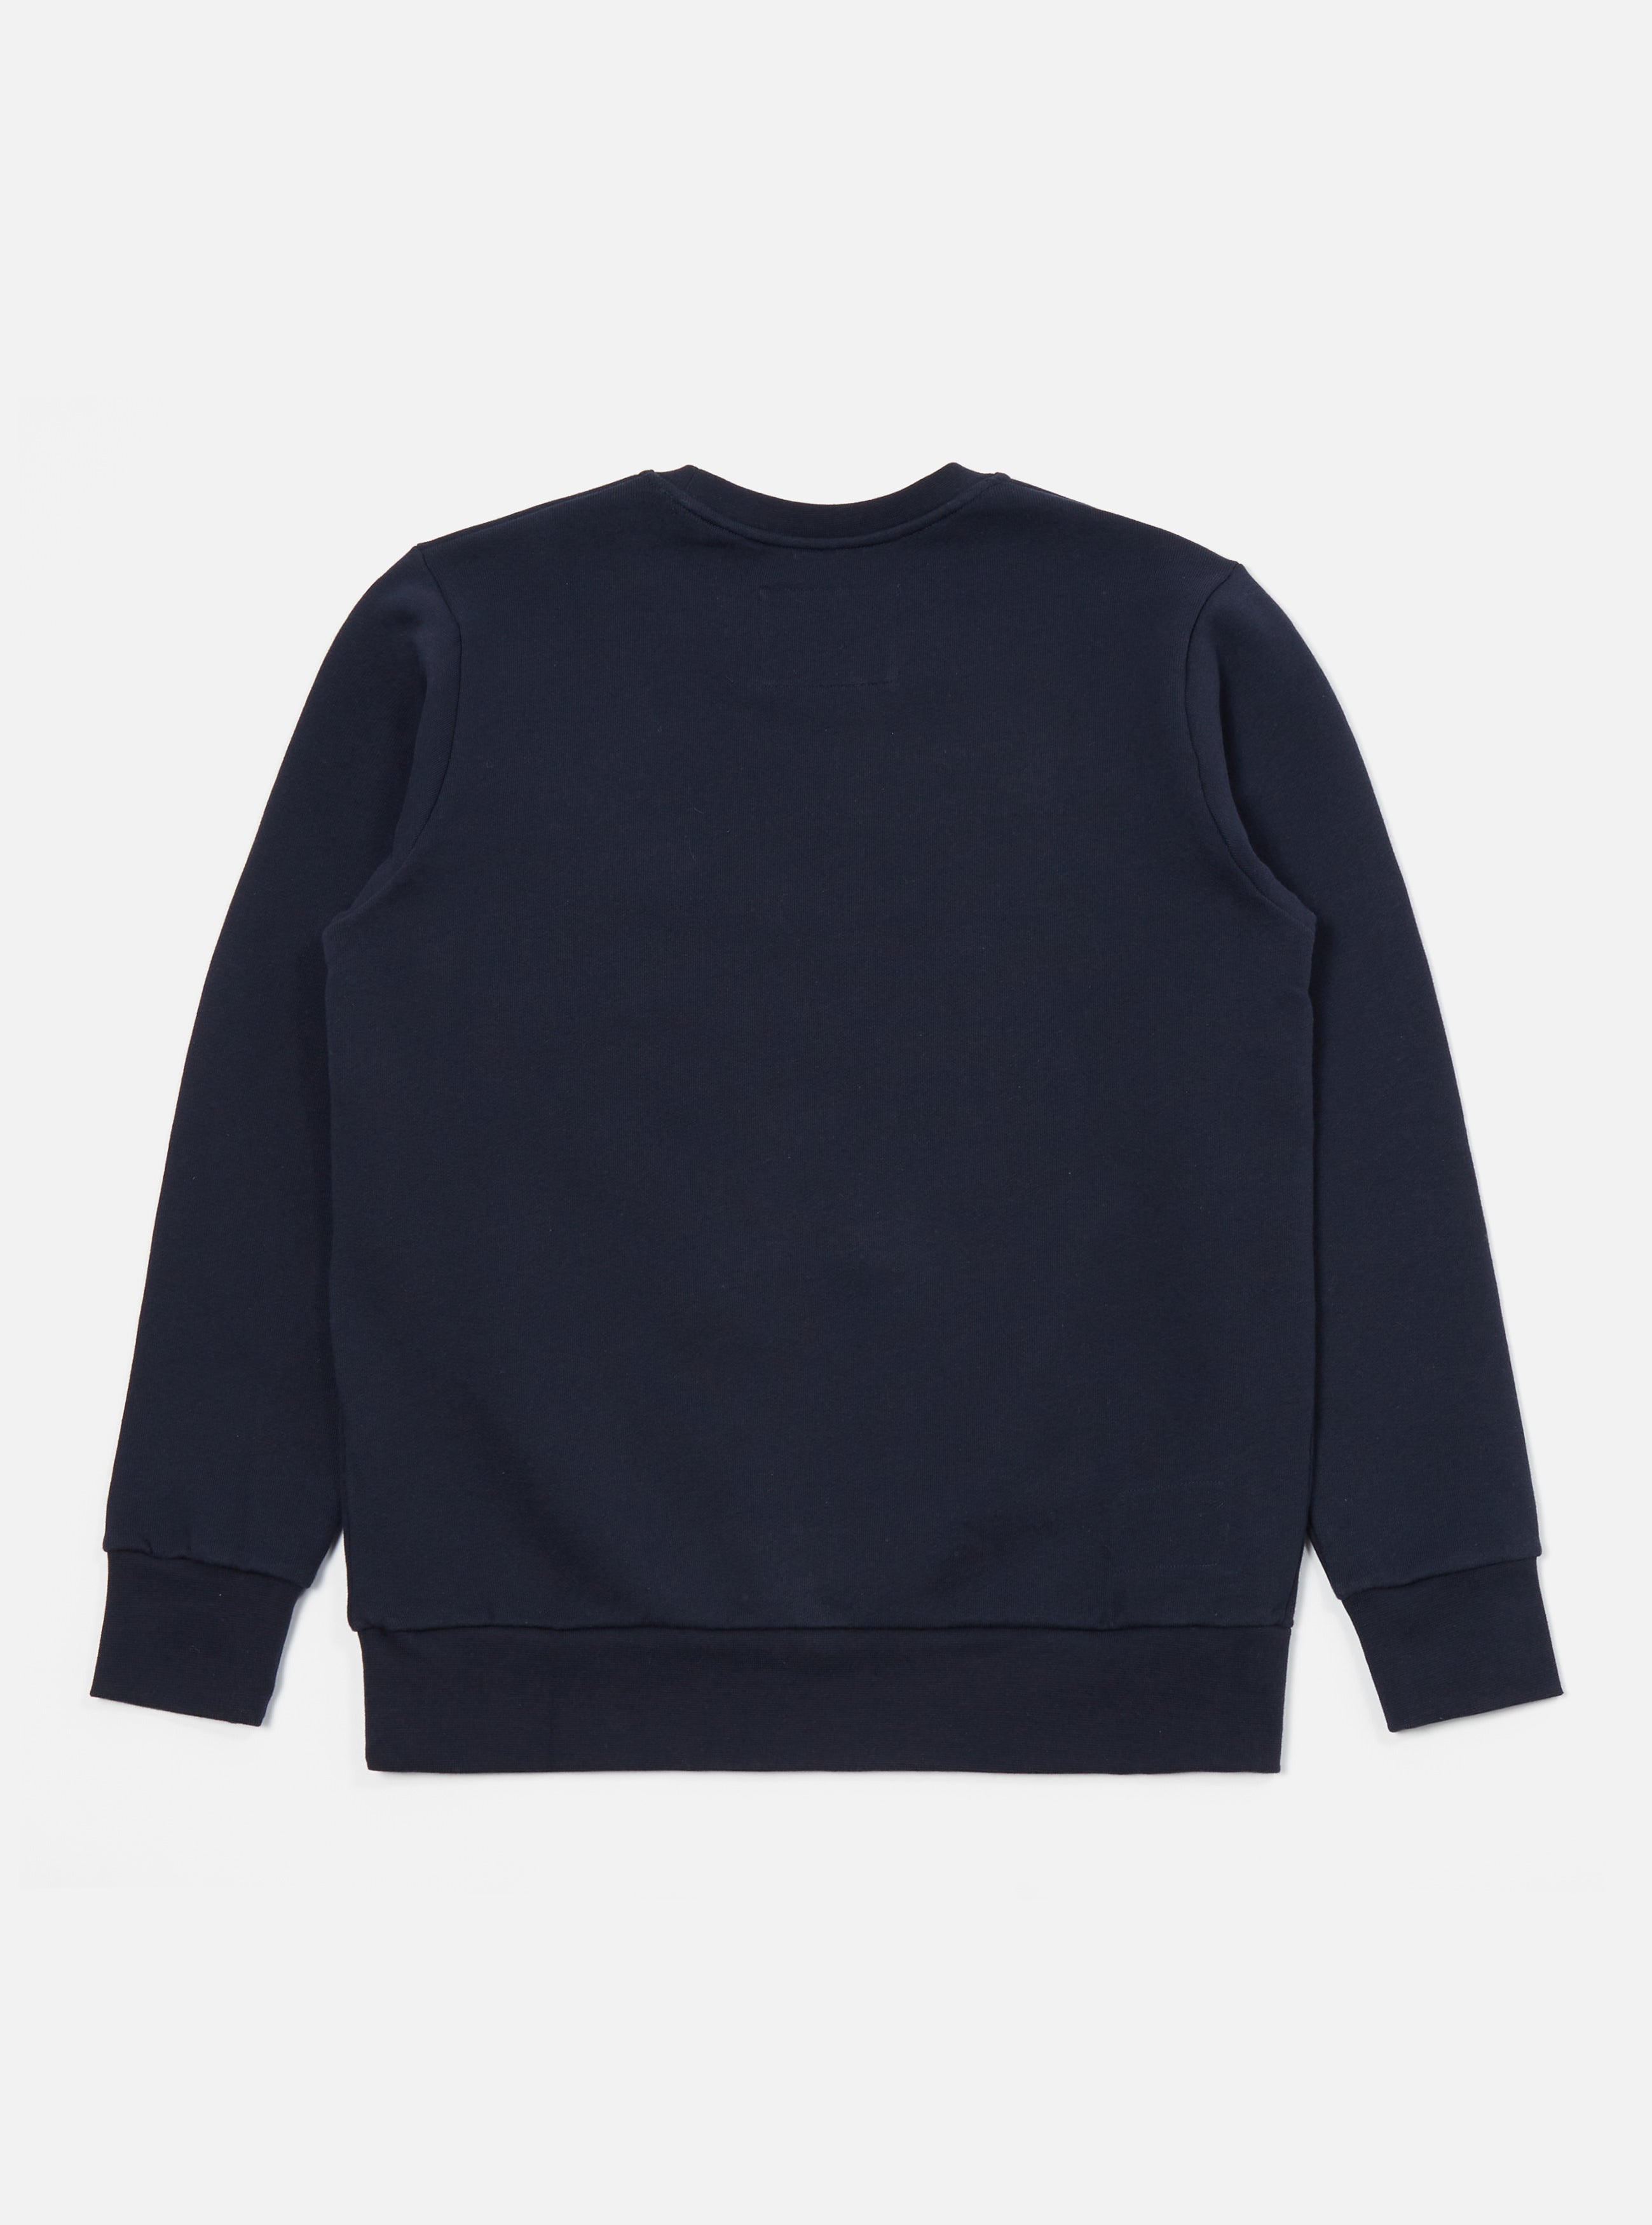 Universal Works x The Pilgrm Loose Pullover in Navy Marl Loopback